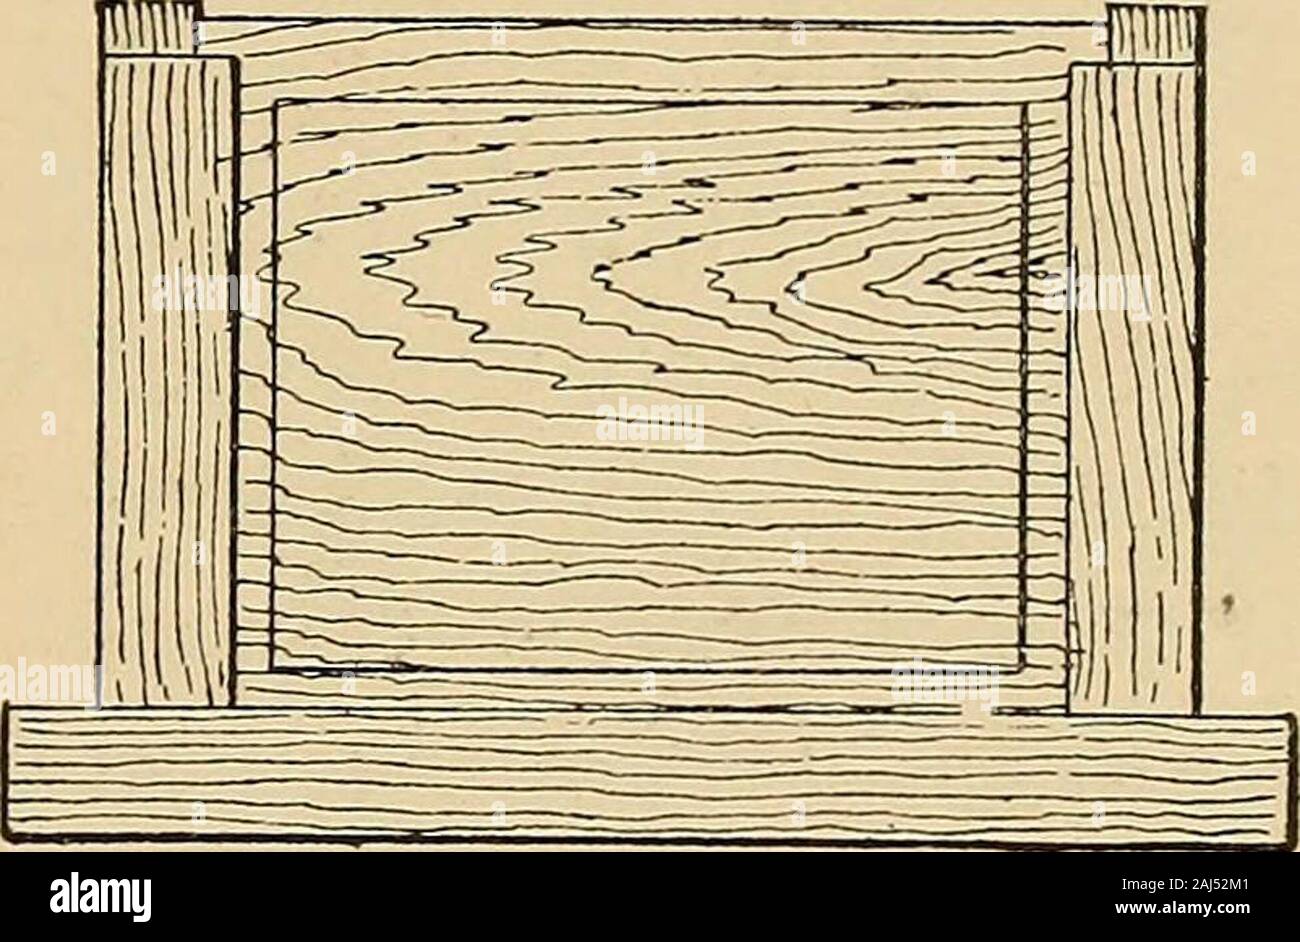 Woodworking for beginners; a manual for amateurs . Fig. 508. Fig. 509. the tenons of one end of the rails and the grooves or mortises ofthe corresponding stile (see Gluing)^ taking care not to put anyglue where it may cause the panel to stick, and fit these partsinto place (Fig. 509). Drive the rails home.Then glue and fit the other side of the framein the same way (Fig, 510)—all being done asquickly as pos-sible. Finallyclamp the framesecurely (seeClamps). Thet o n gu e d andgrooved joi n trepresented in the accompanying illustrations is not as good as a mortise andtenon, as already stated, b Stock Photo